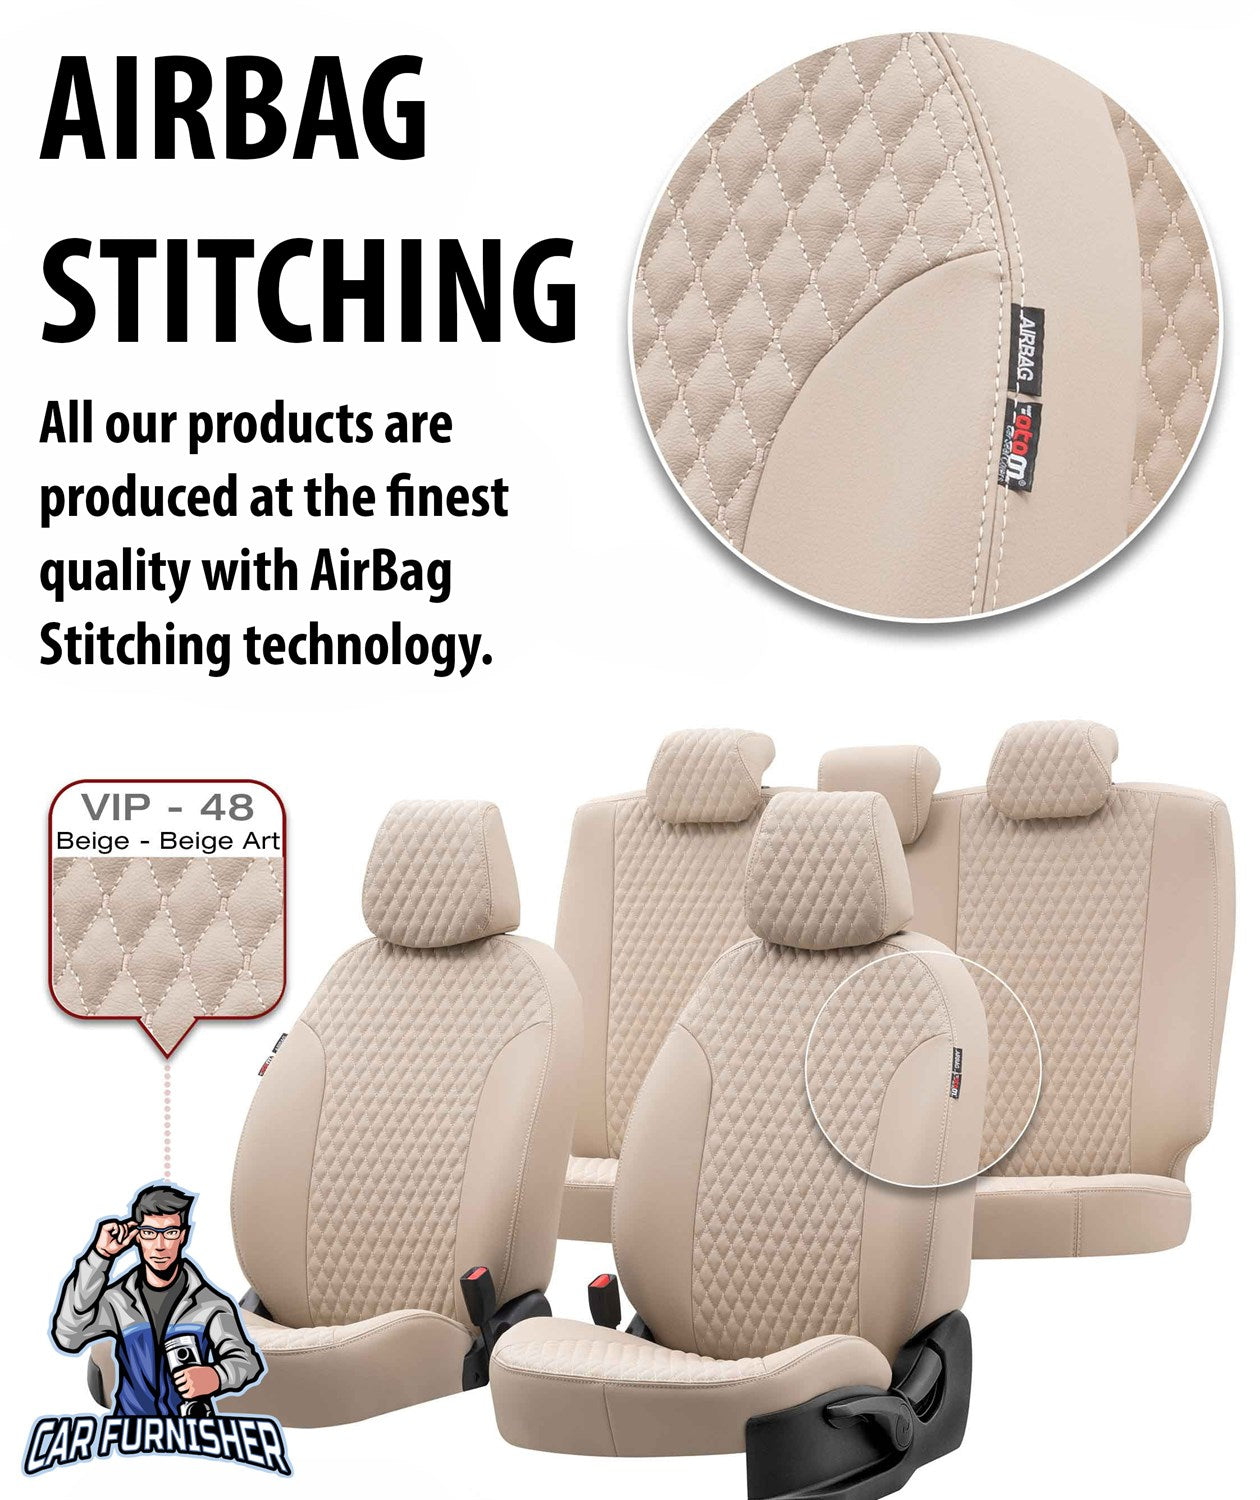 Renault Captur Seat Covers Amsterdam Leather Design Ivory Leather